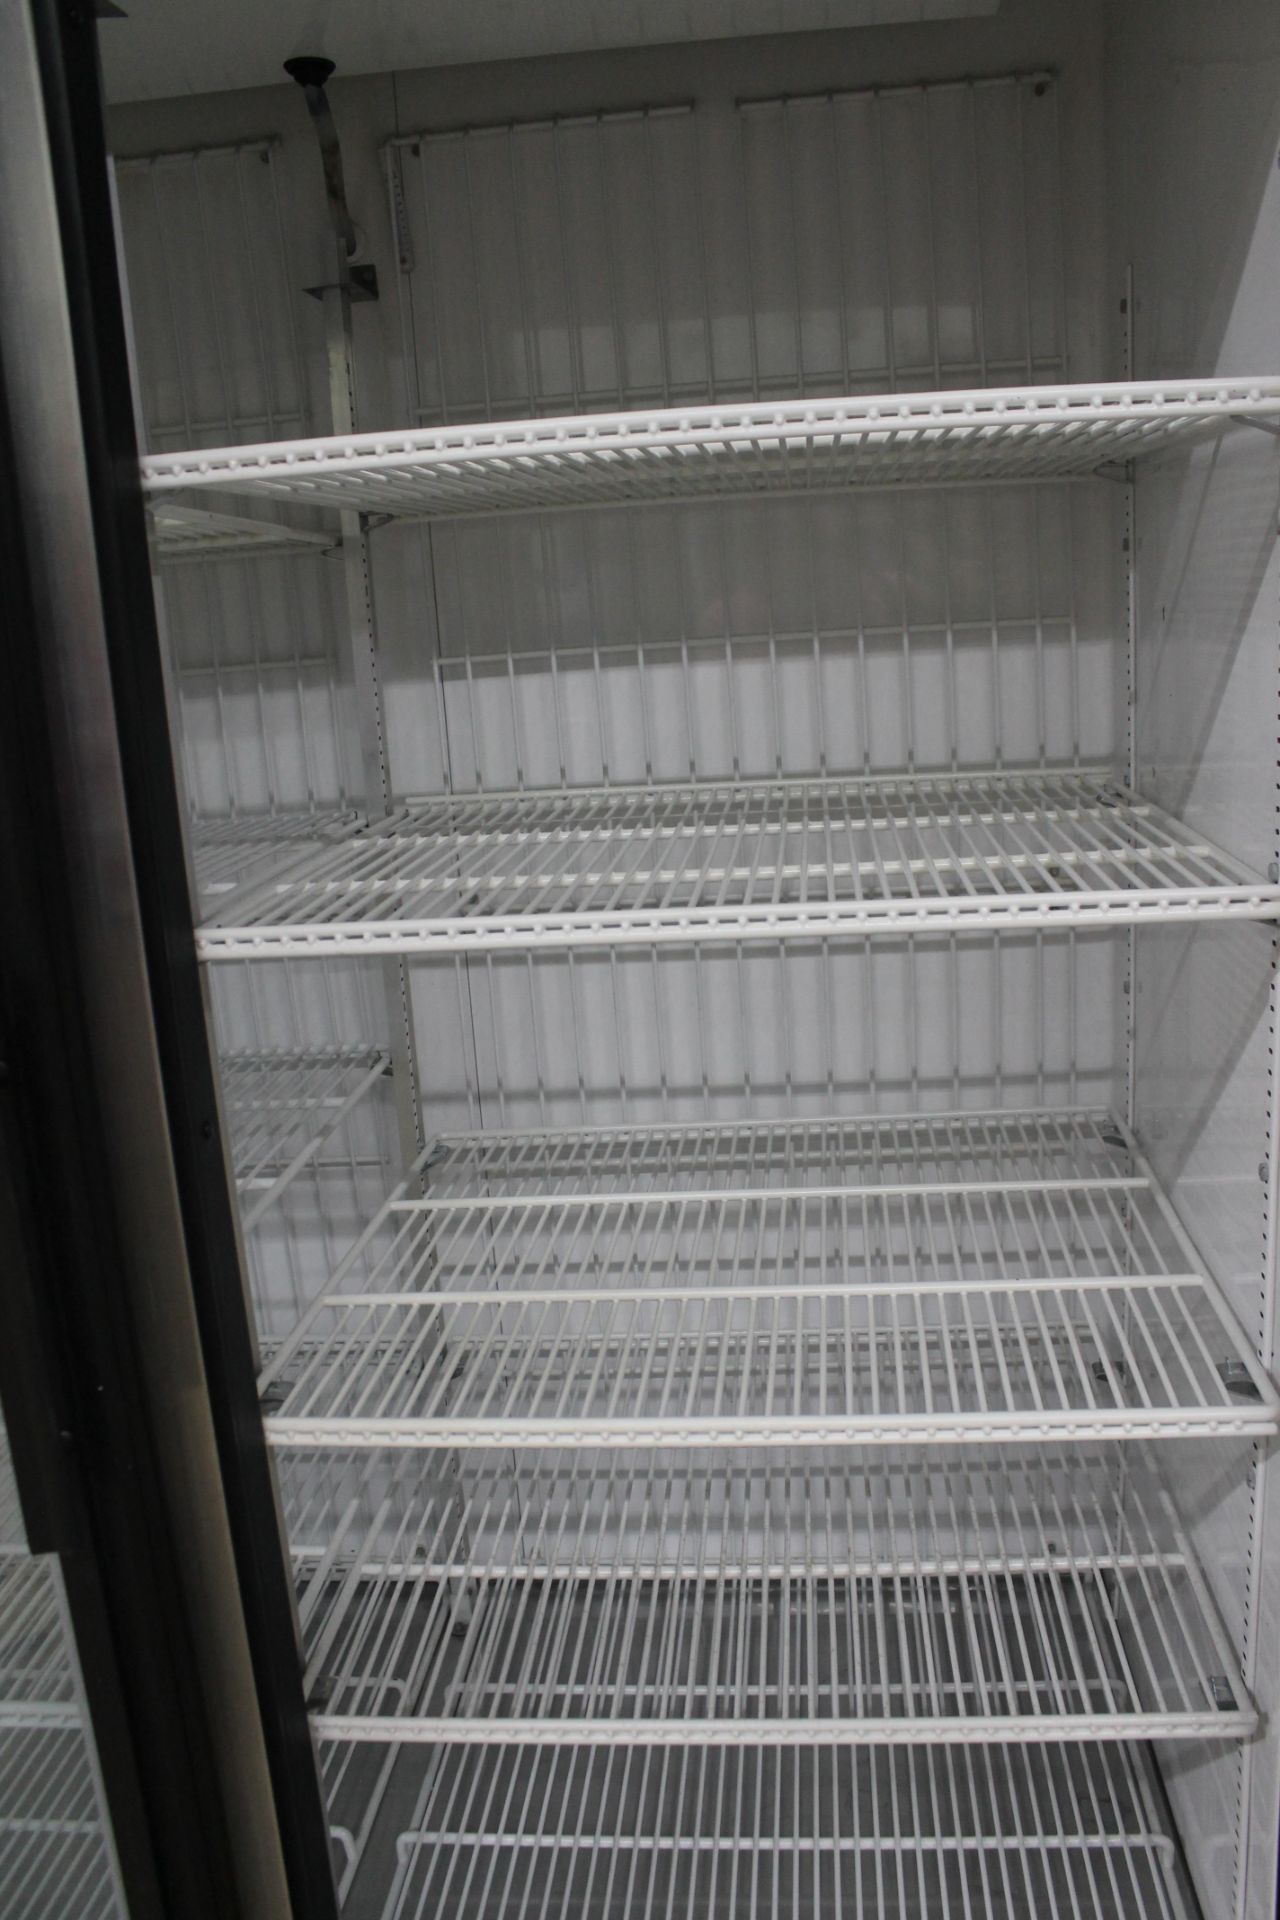 USED SWING DOOR REFRIGERATOR WITH HYDROCARBON REFRIGERANT - Image 3 of 4